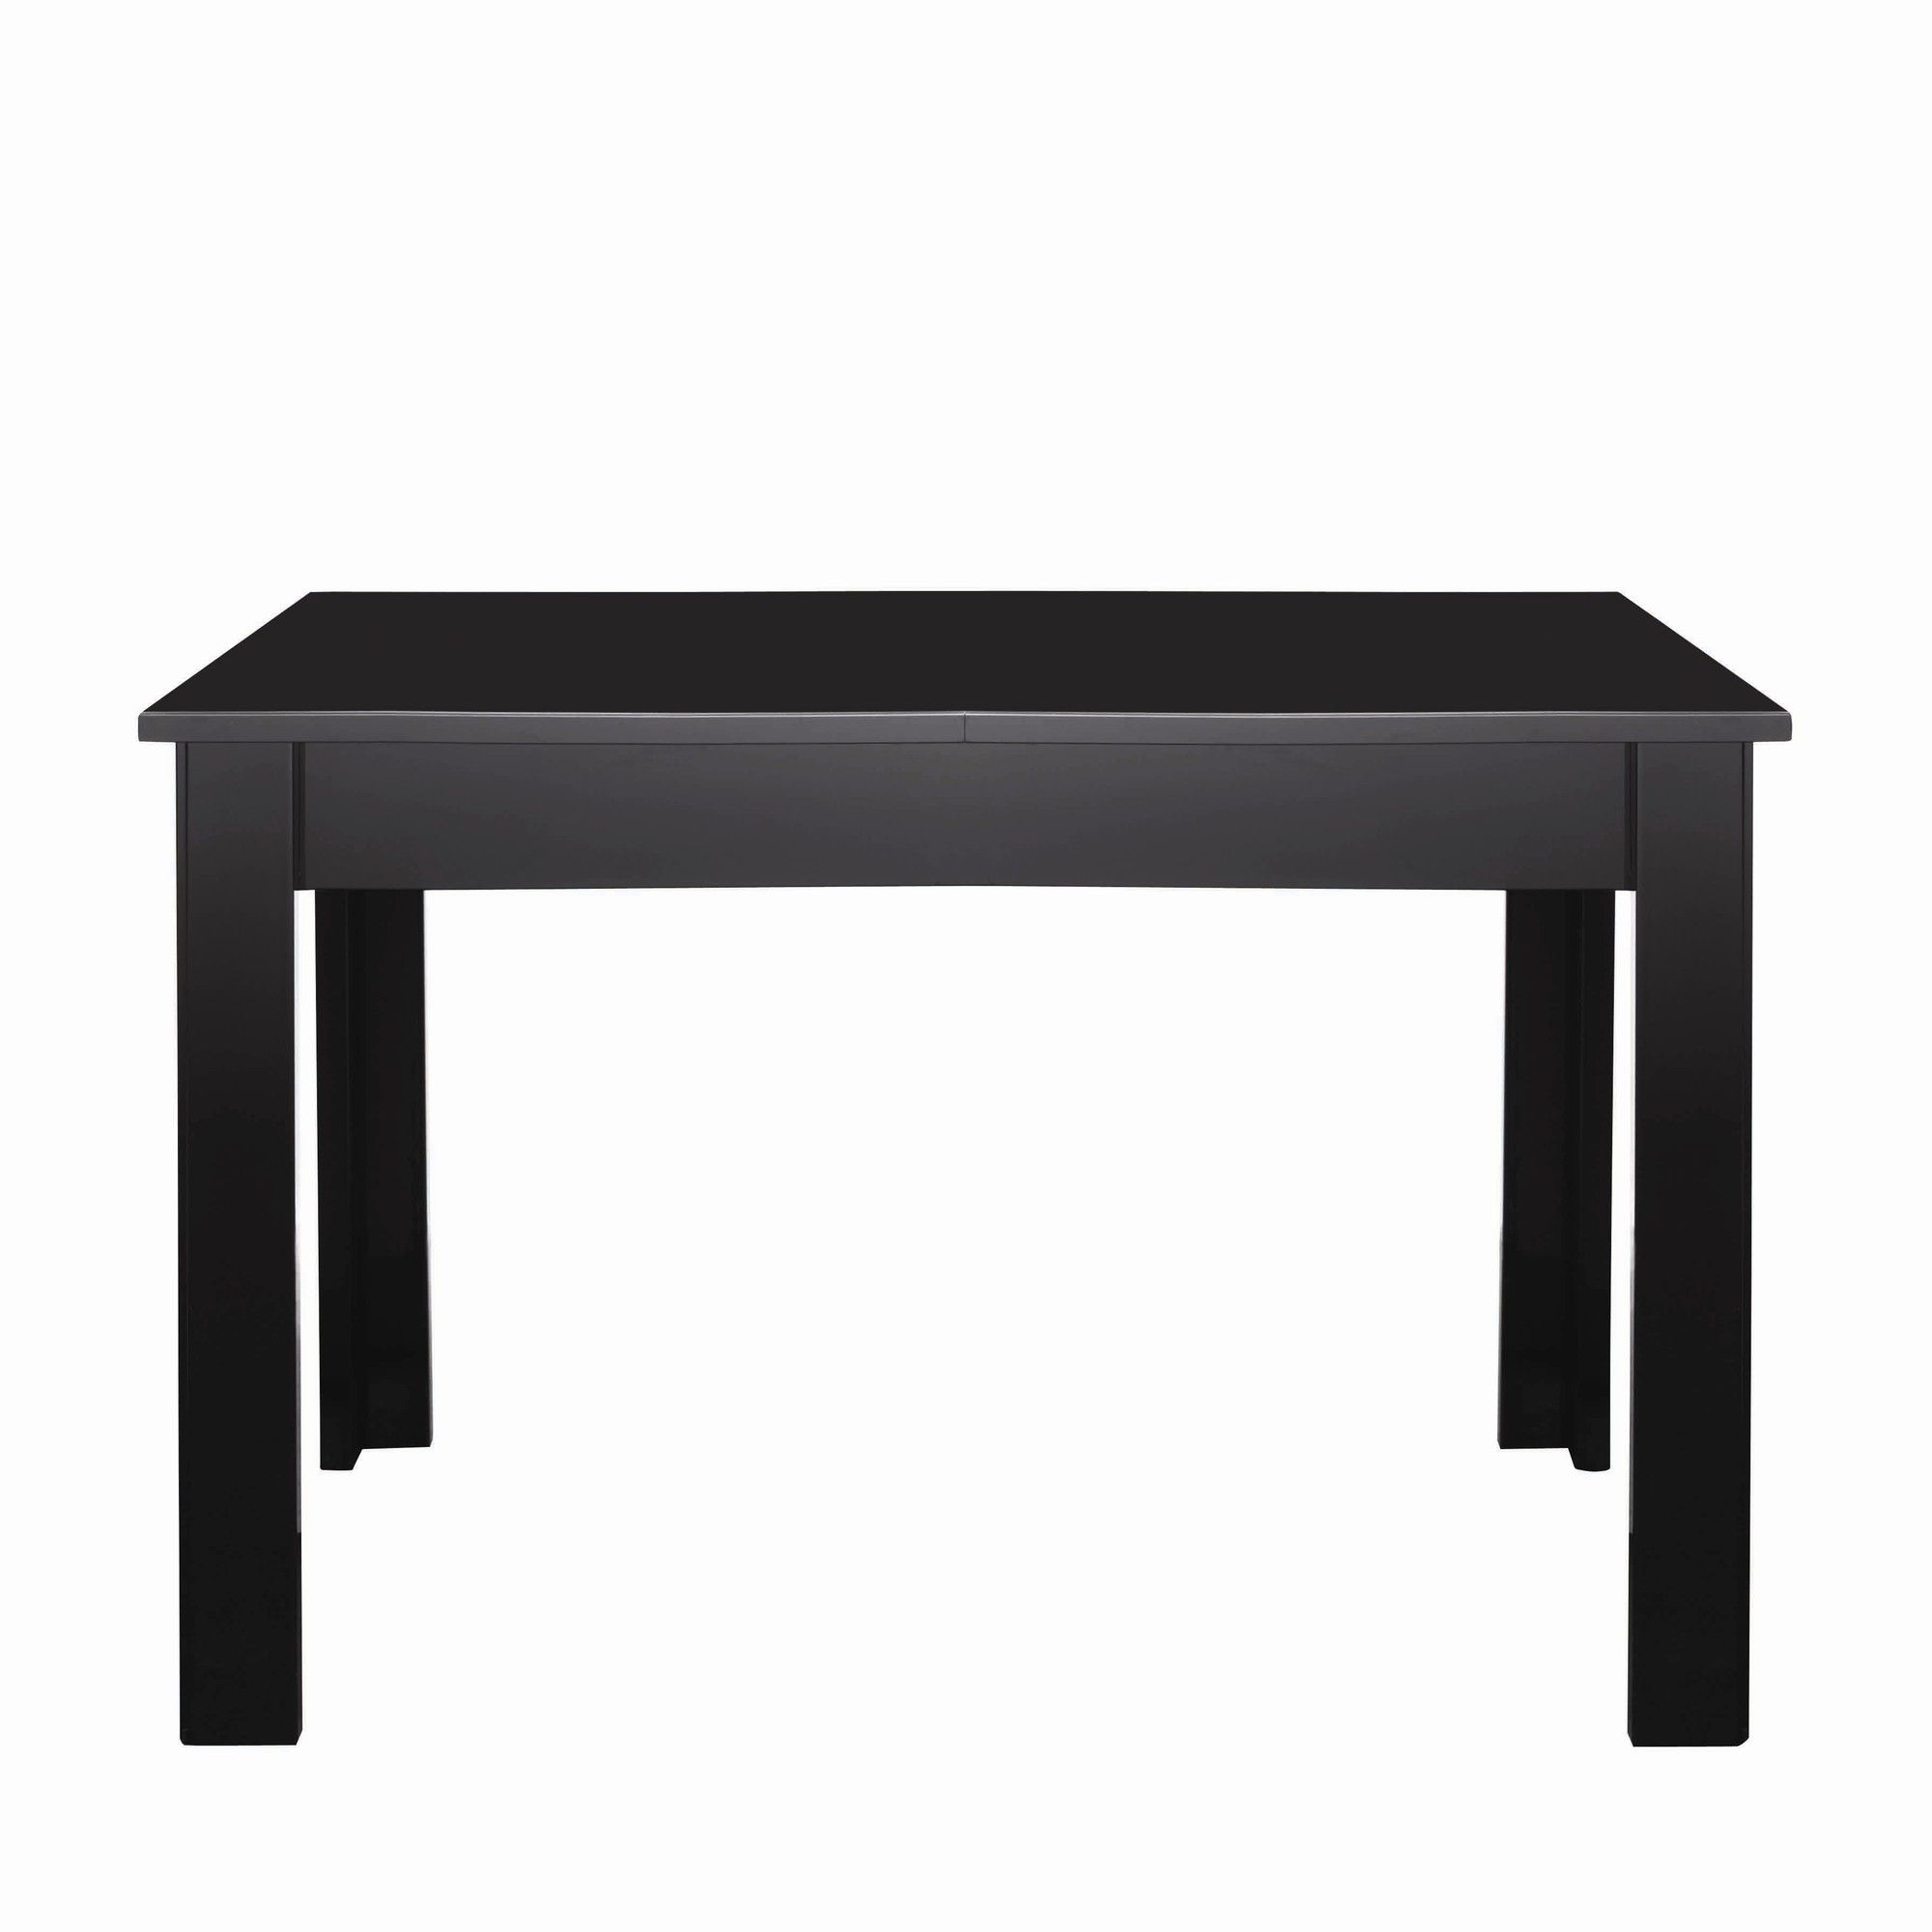 Caxton Manhattan Table with 4 Chairs in Black Gloss at Tesco Direct